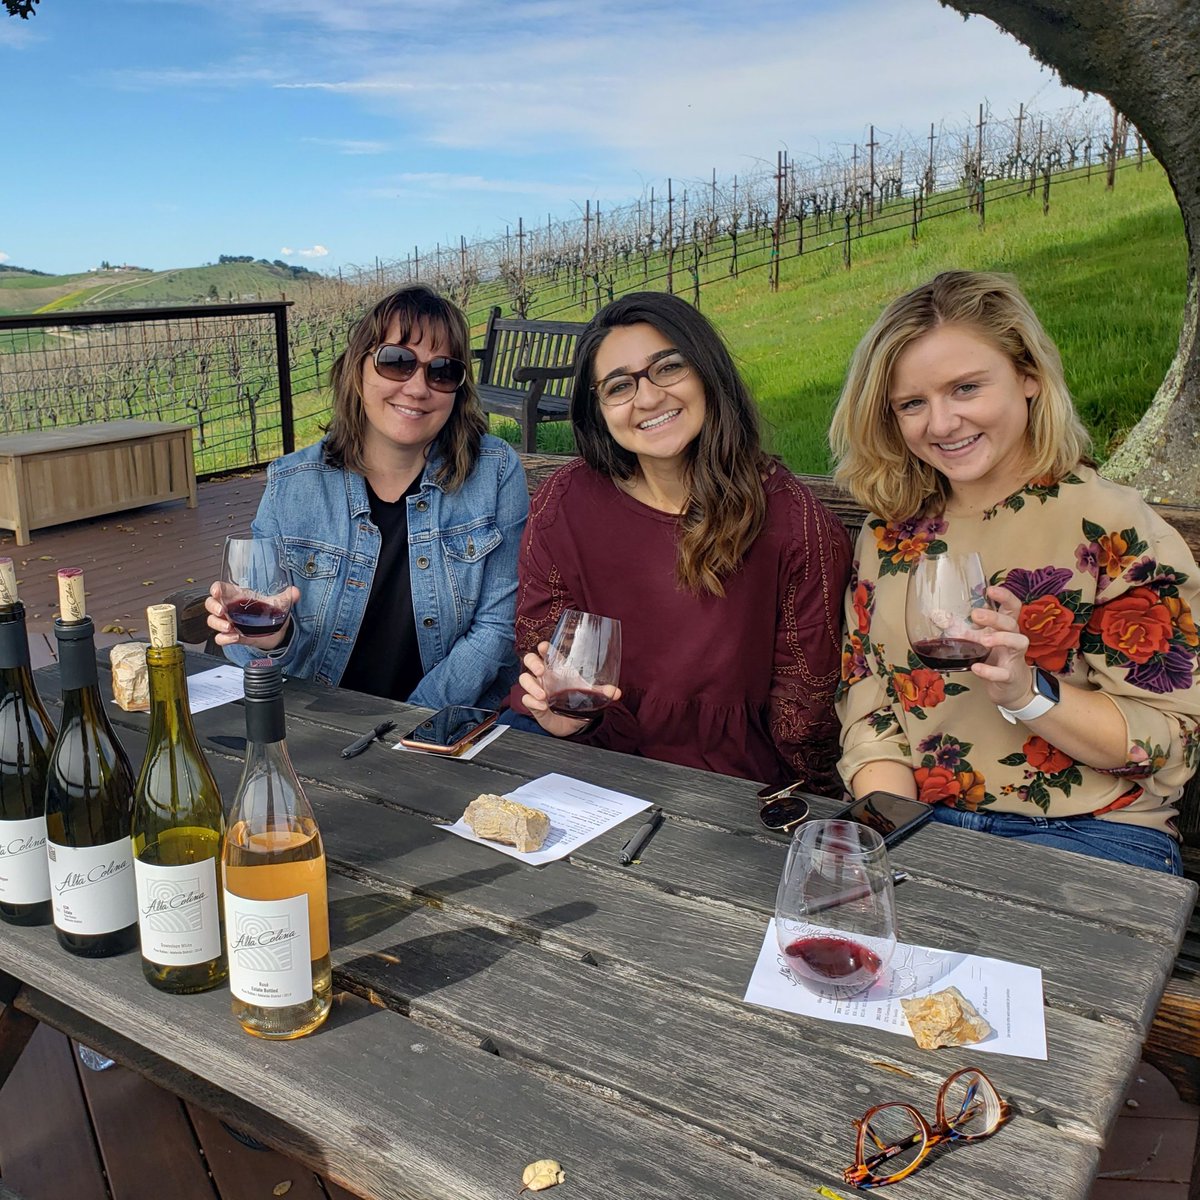 Celebrate love with wine! 🥂💍 Planning a wedding or bridal party? Elevate the fun with a #BreakawayWineTours experience. Book today at breakaway-tours.com. #PasoRobles #SLOCoastWine #SantaBarbara #WeddingParty